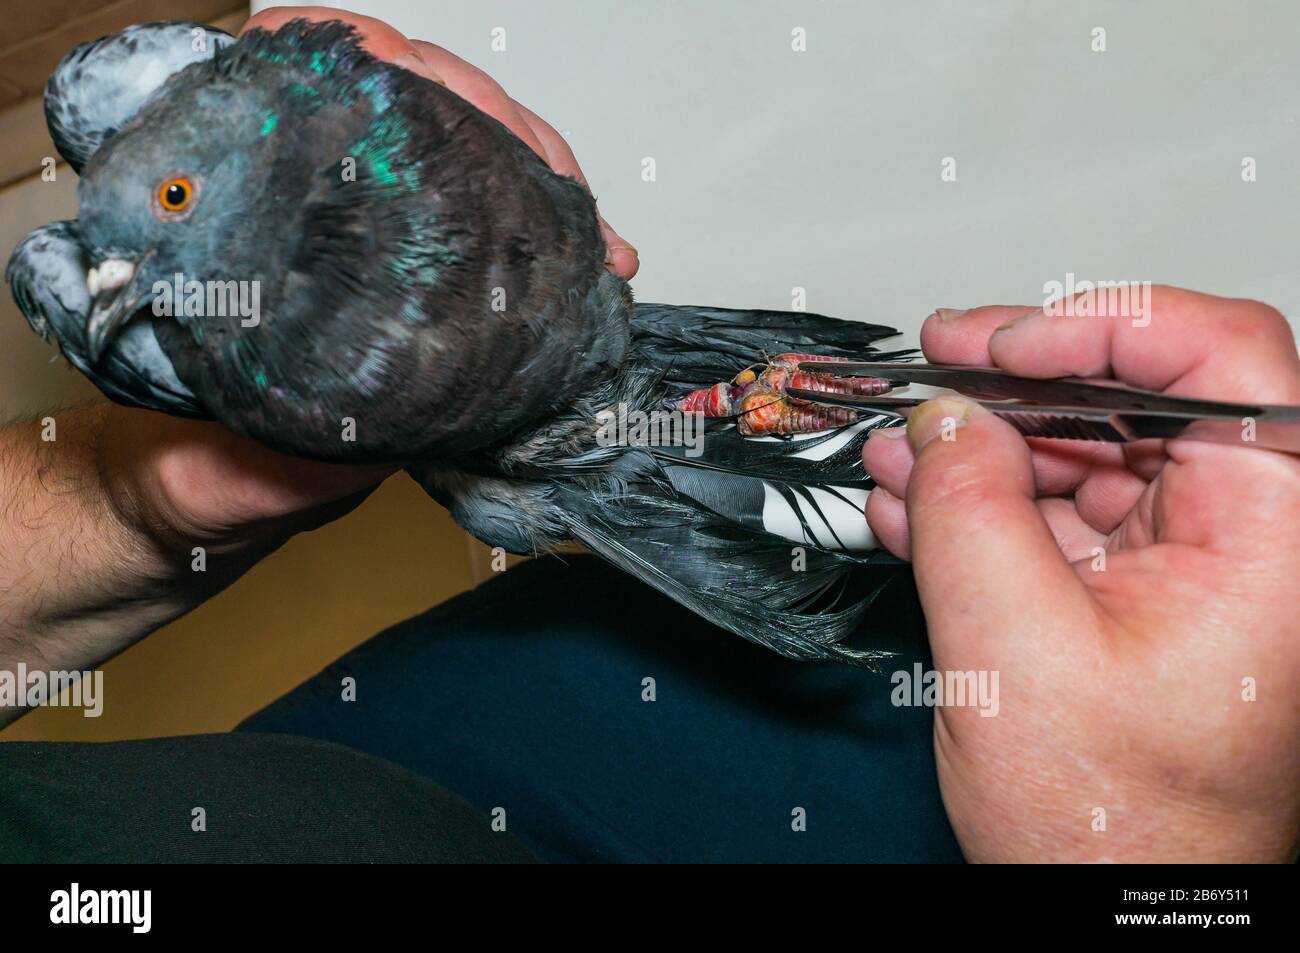 Veterinary care for the pigeon. The pigeon fell into snares. The pigeon's paw is deformed by threads and ropes from the trap. Stock Photo